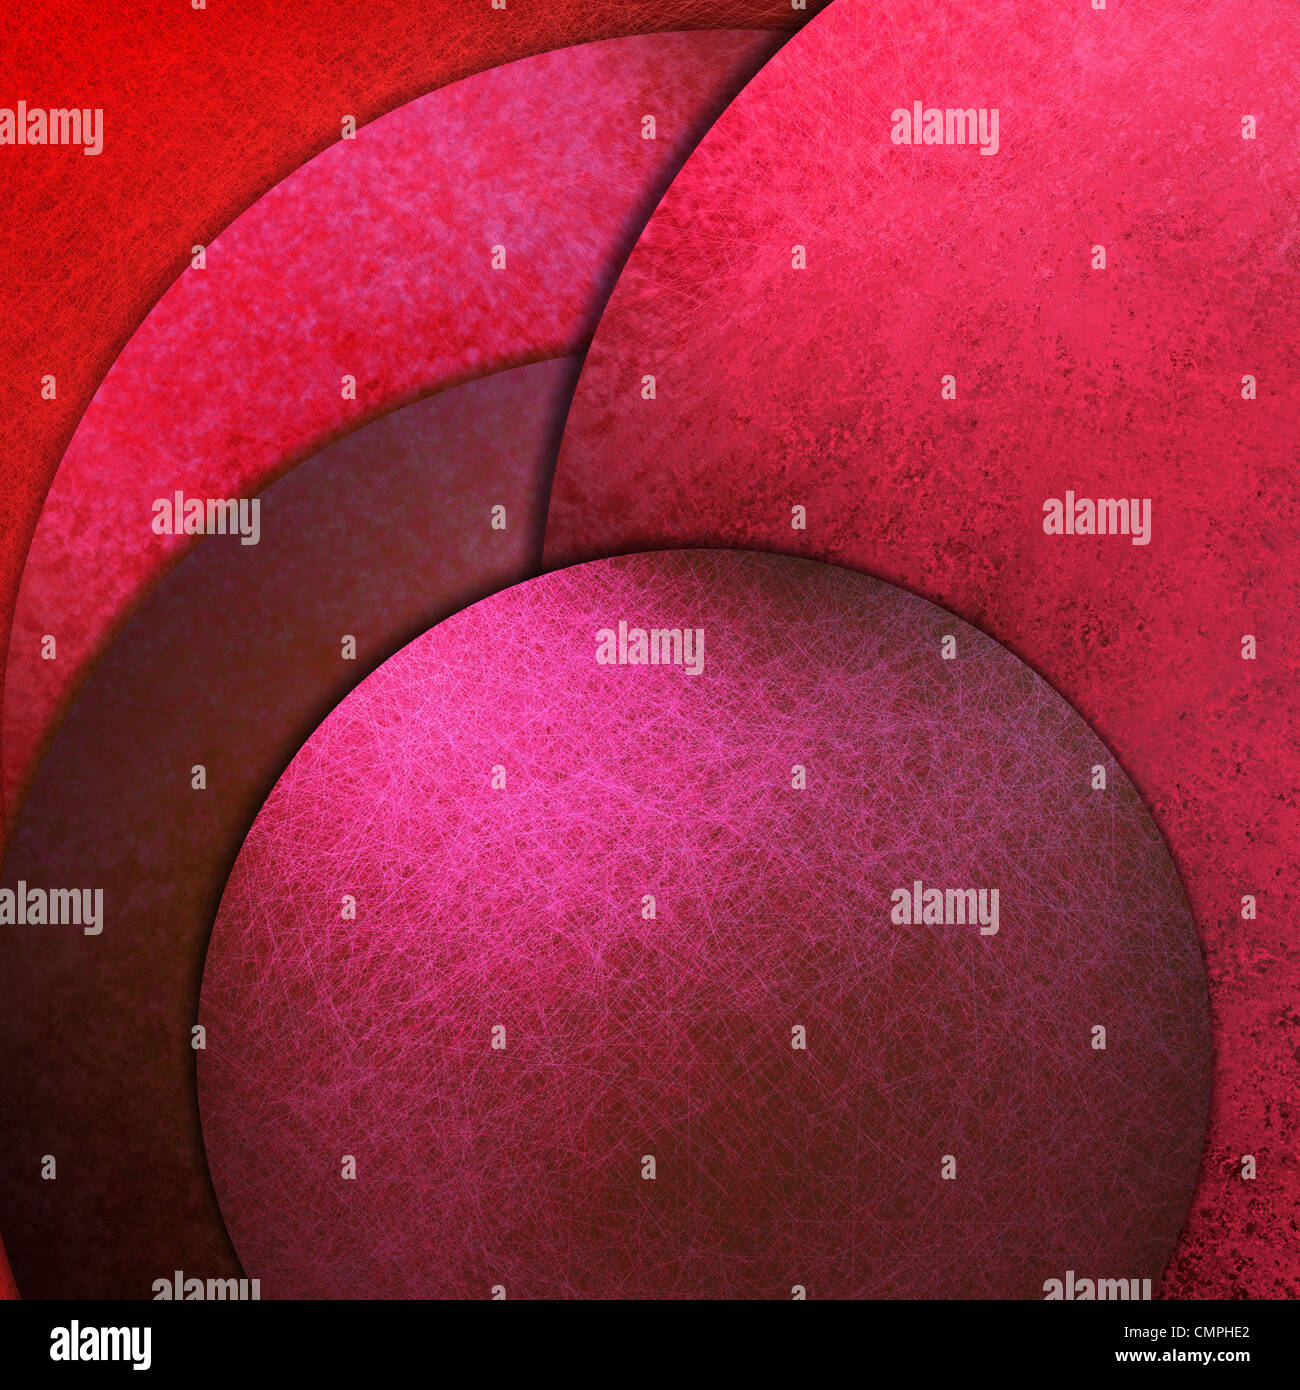 abstract background pink circles Stock Photo